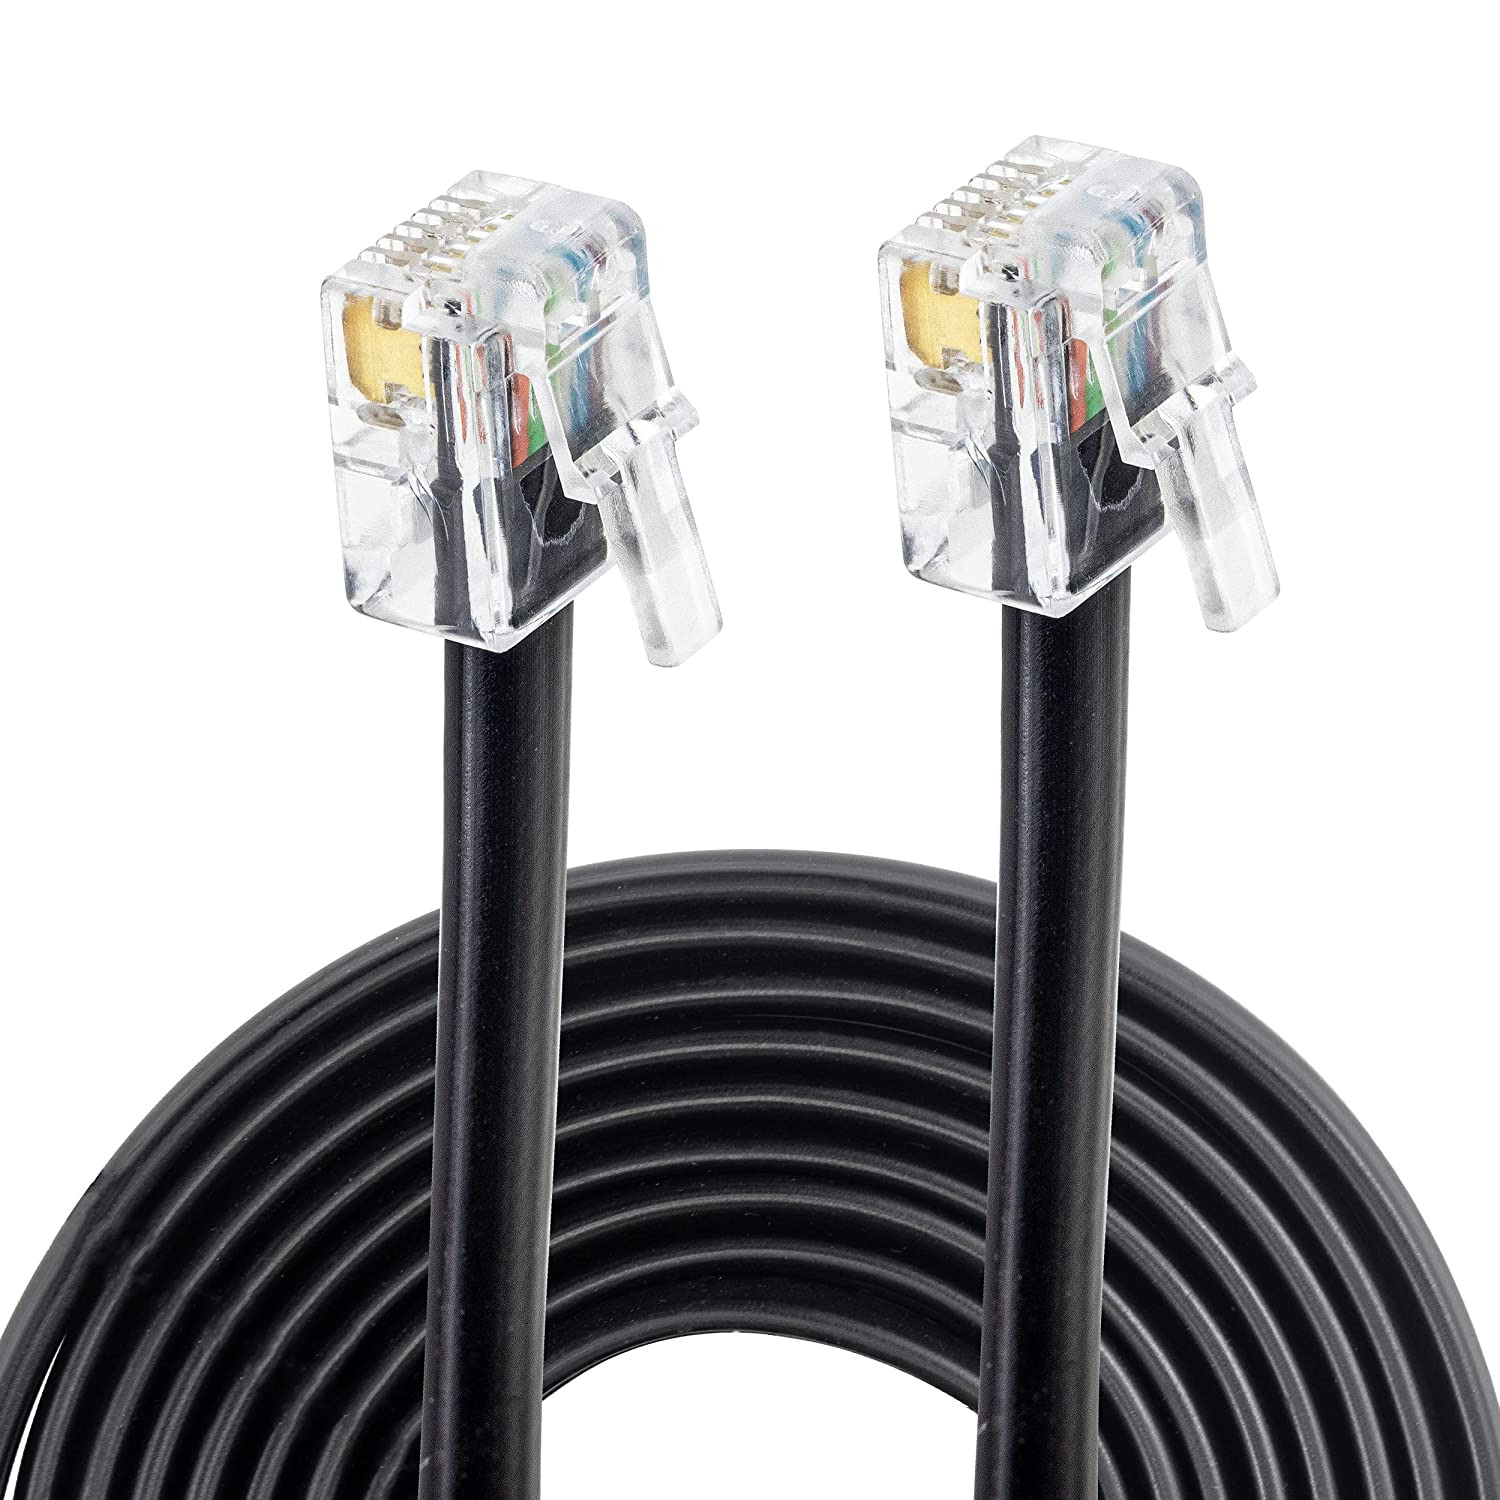 5 Feet RJ11 / RJ12 Data Cable - Heavy Duty 6-Pins High-Speed Extension for Cash